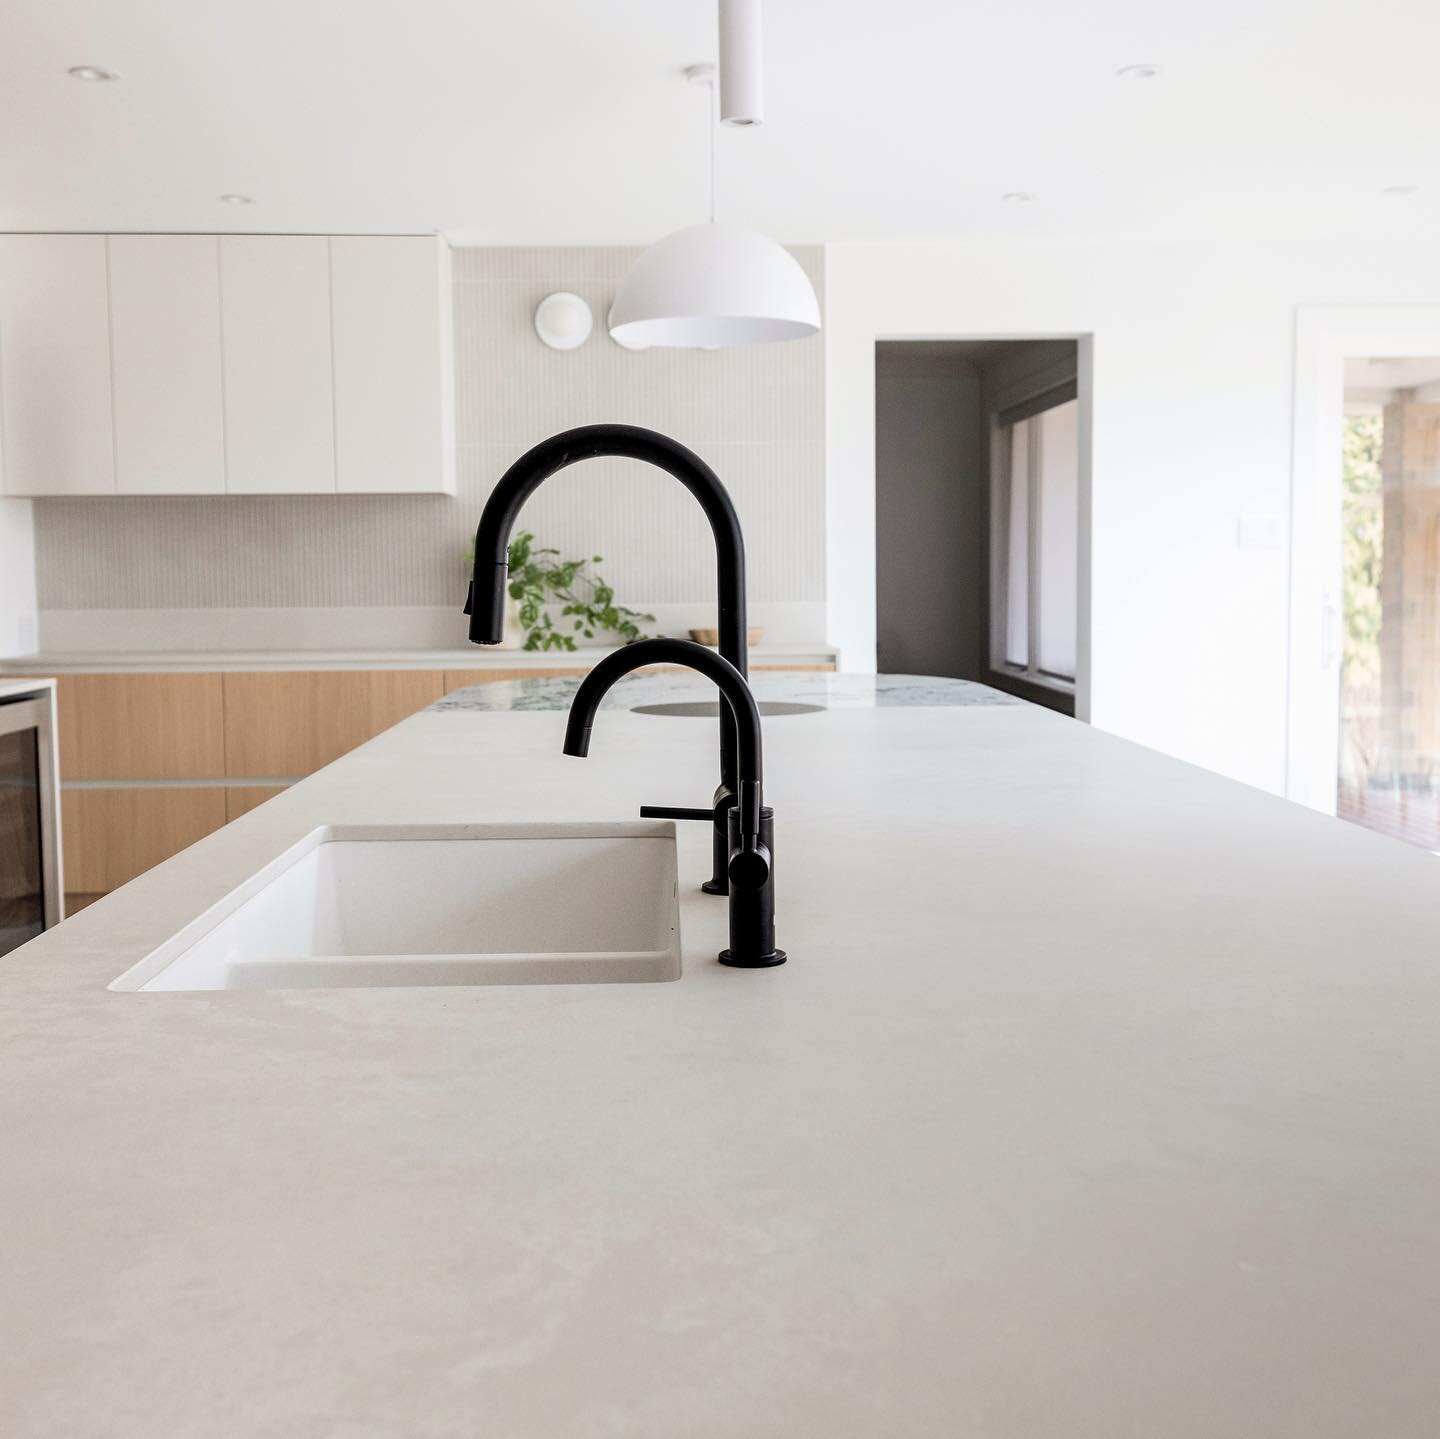 Our favourite quartz countertop by @caesarstoneca is Cloudburst Concrete. We always come back to it. It&rsquo;s gentle but a little bit edgey. It&rsquo;s soft without being boring and it&rsquo;s bright without being jarring. All the right kinds of Me